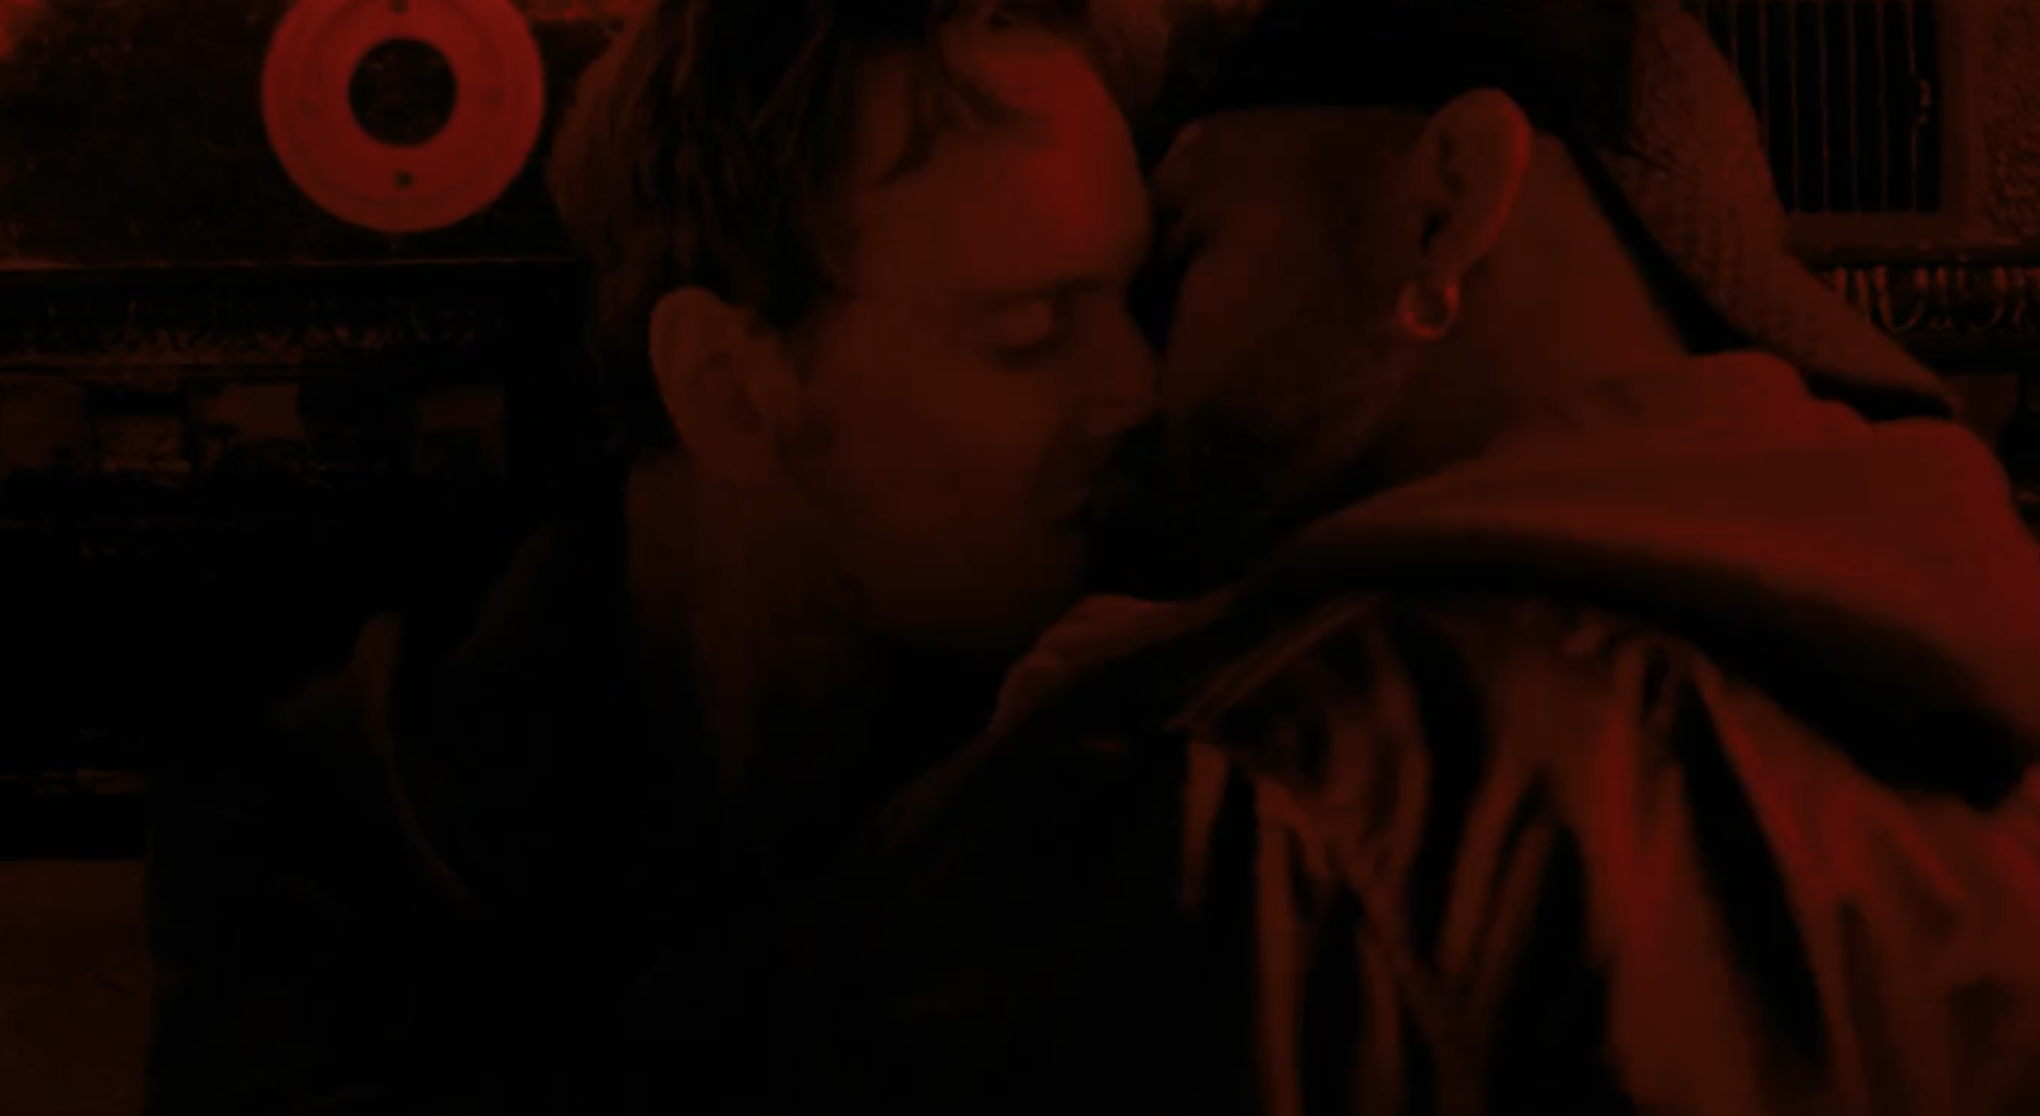 fully clothed gay men making out strip